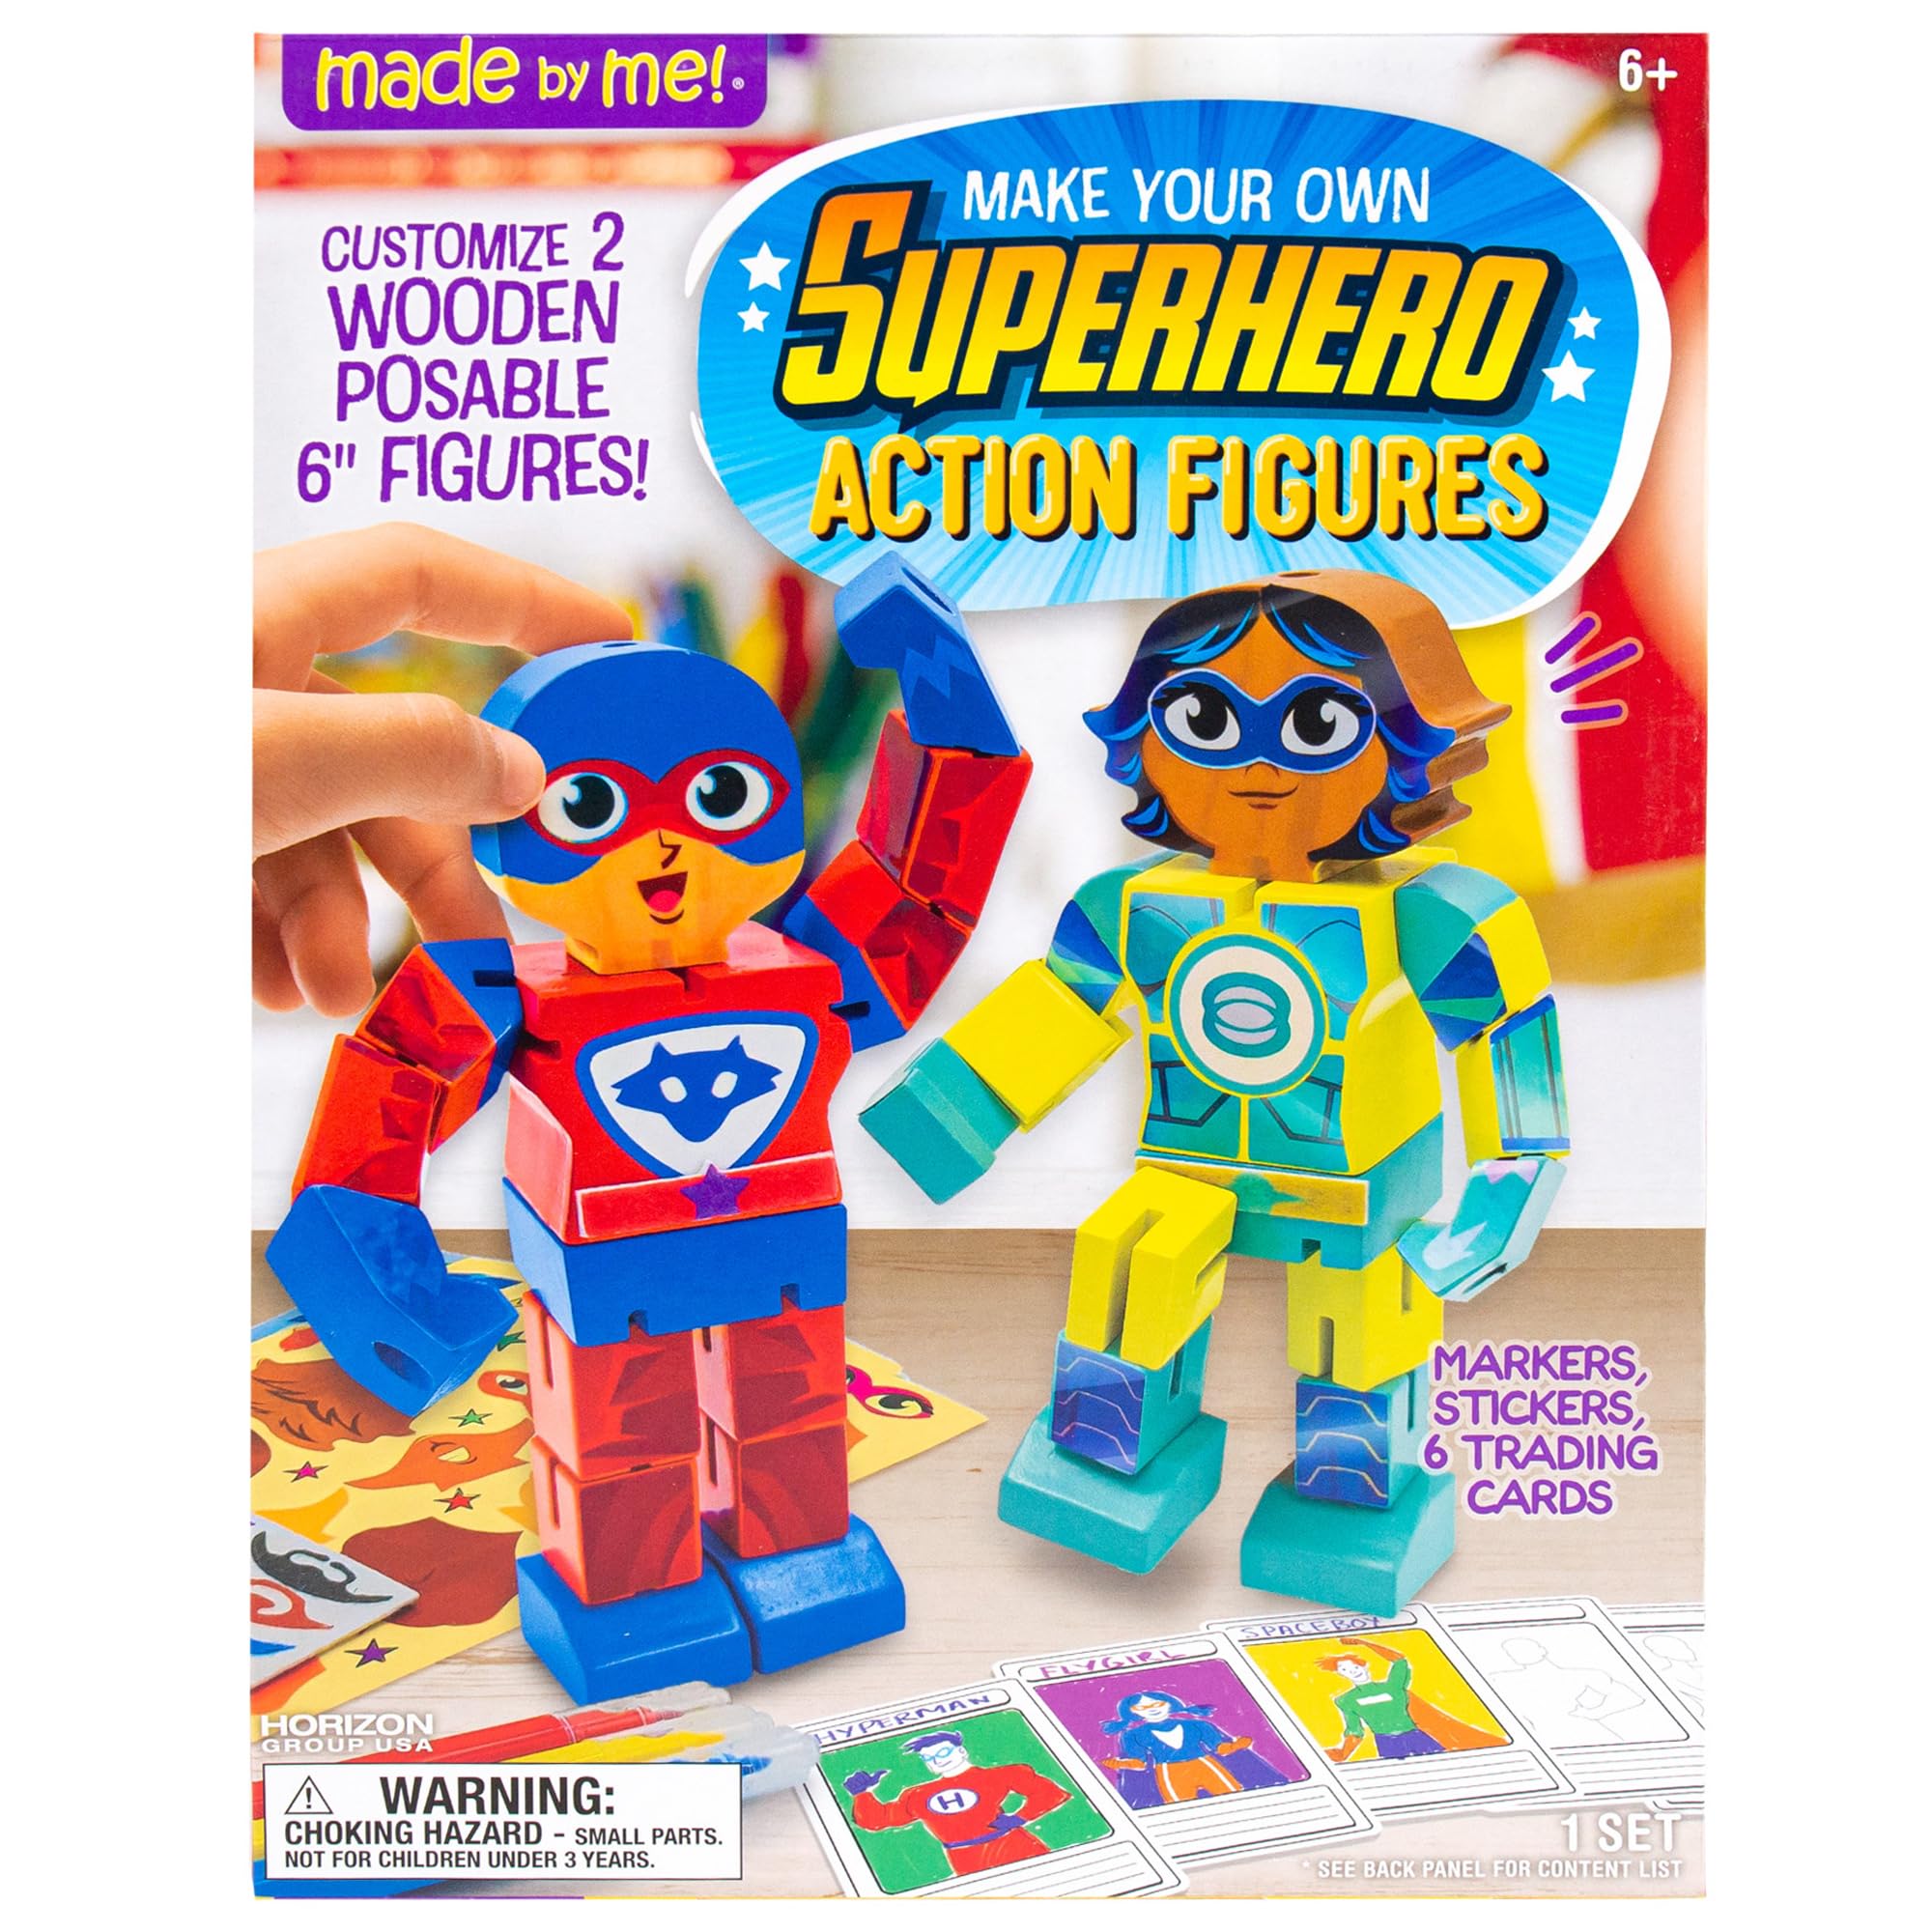 Made By Me Make Your Own Superhero Action Figurines, Make Your Own Action Figure, Includes Superhero Stickers, Moving Superhero Figurines, Customize Trading Cards for Kids, Arts & Crafts Set Ages 6+